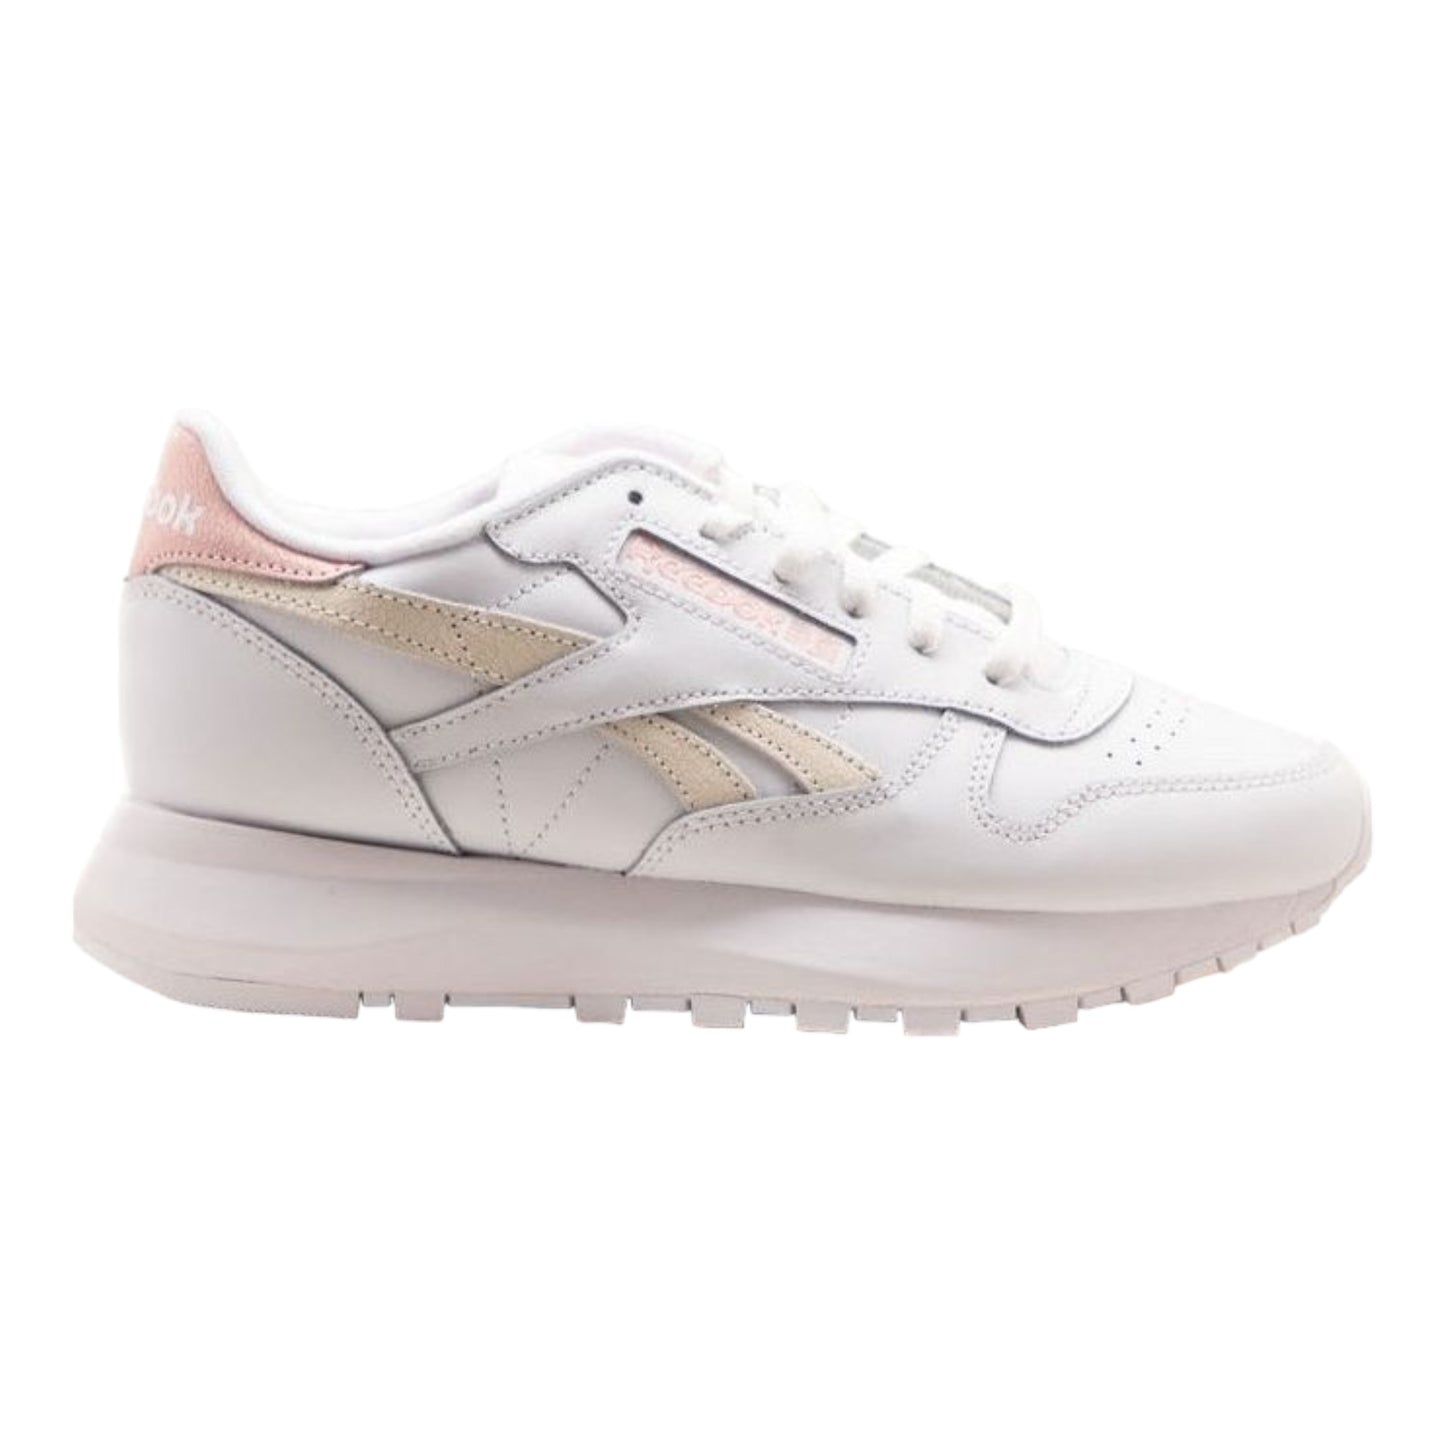 WMNS REEBOK CLASSIC LEATHER SP